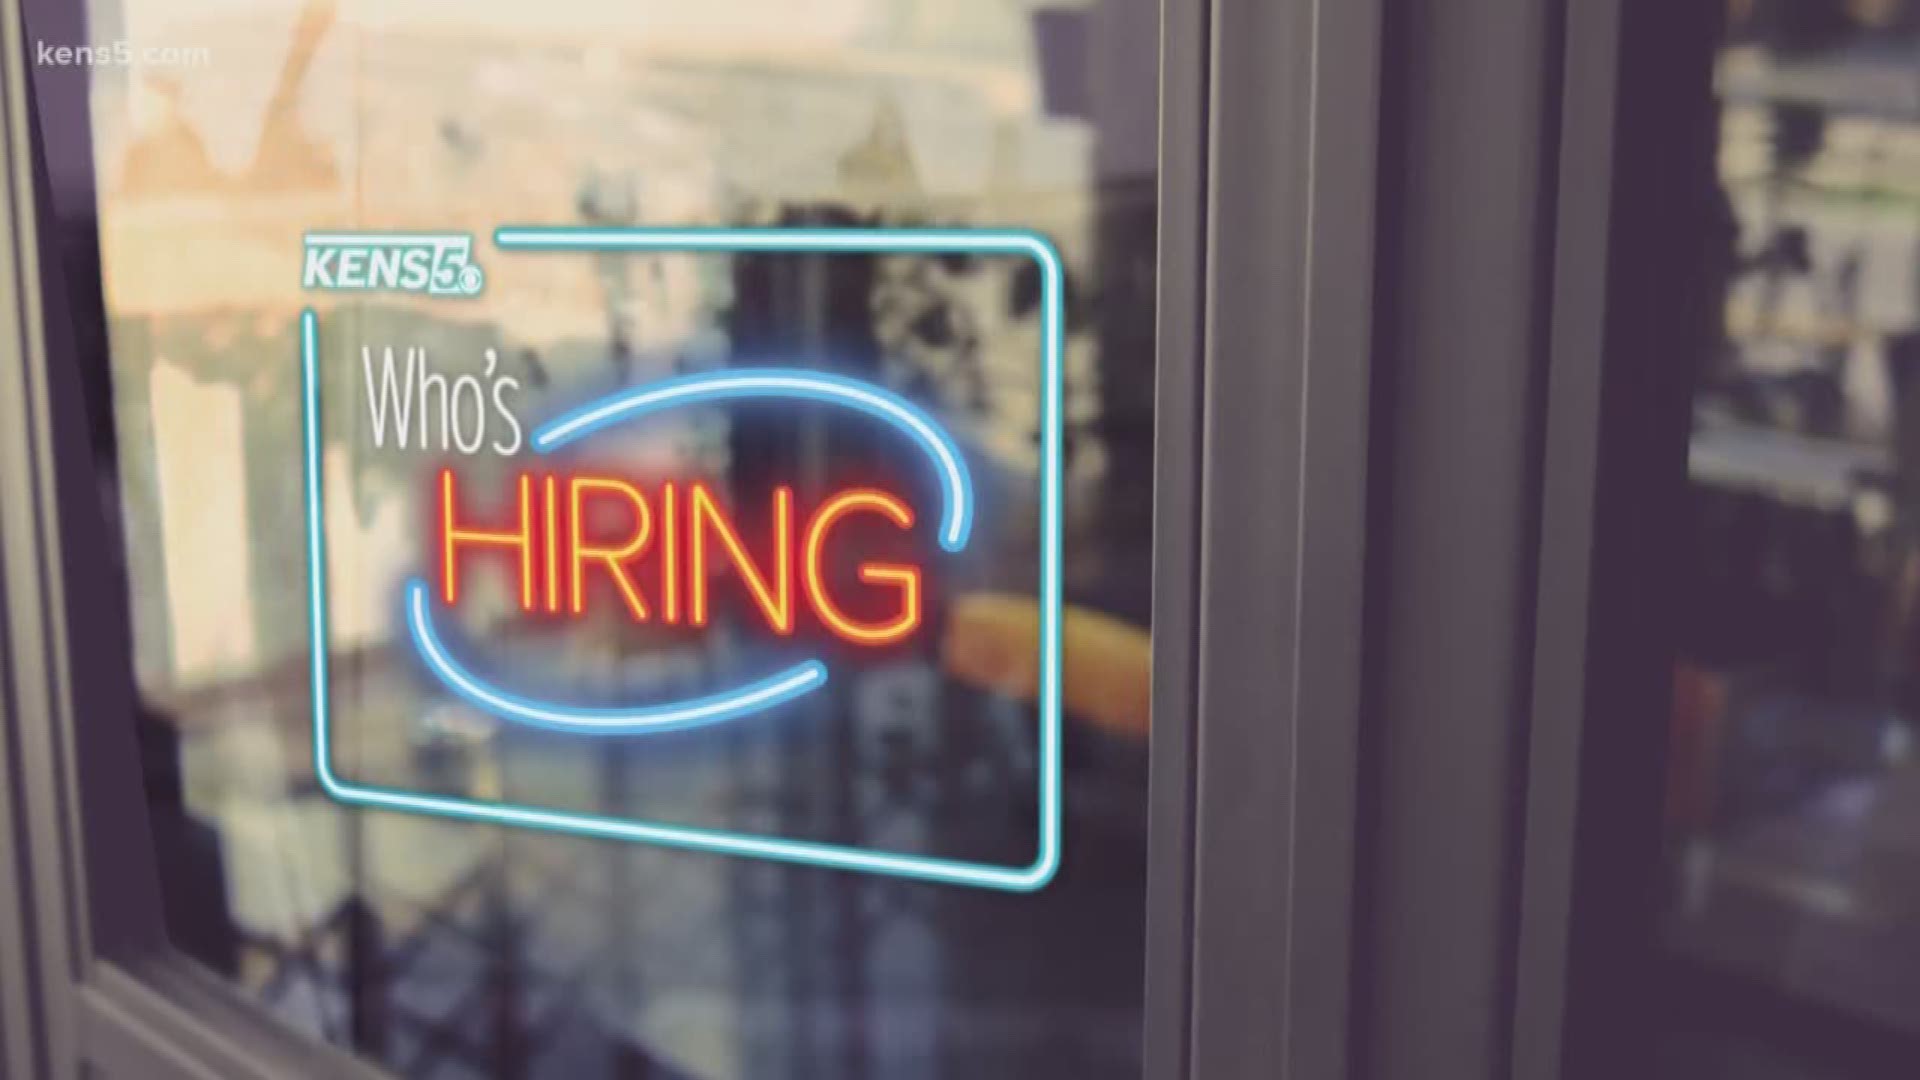 Every Tuesday we share about local companies that are hiring in the San Antonio area.